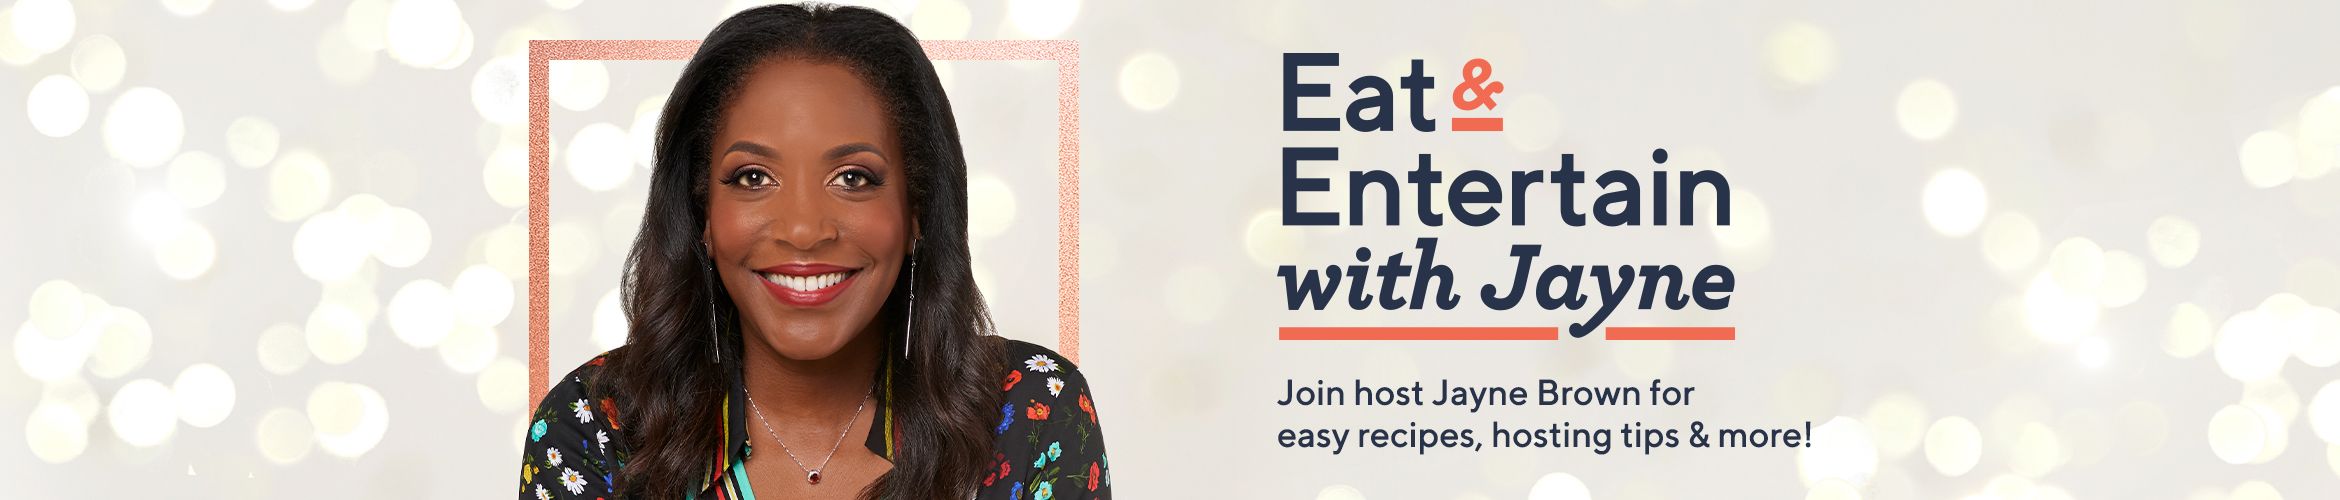 Eat & Entertain with Jayne Join host Jayne Brown for easy recipes, hosting tips & more!